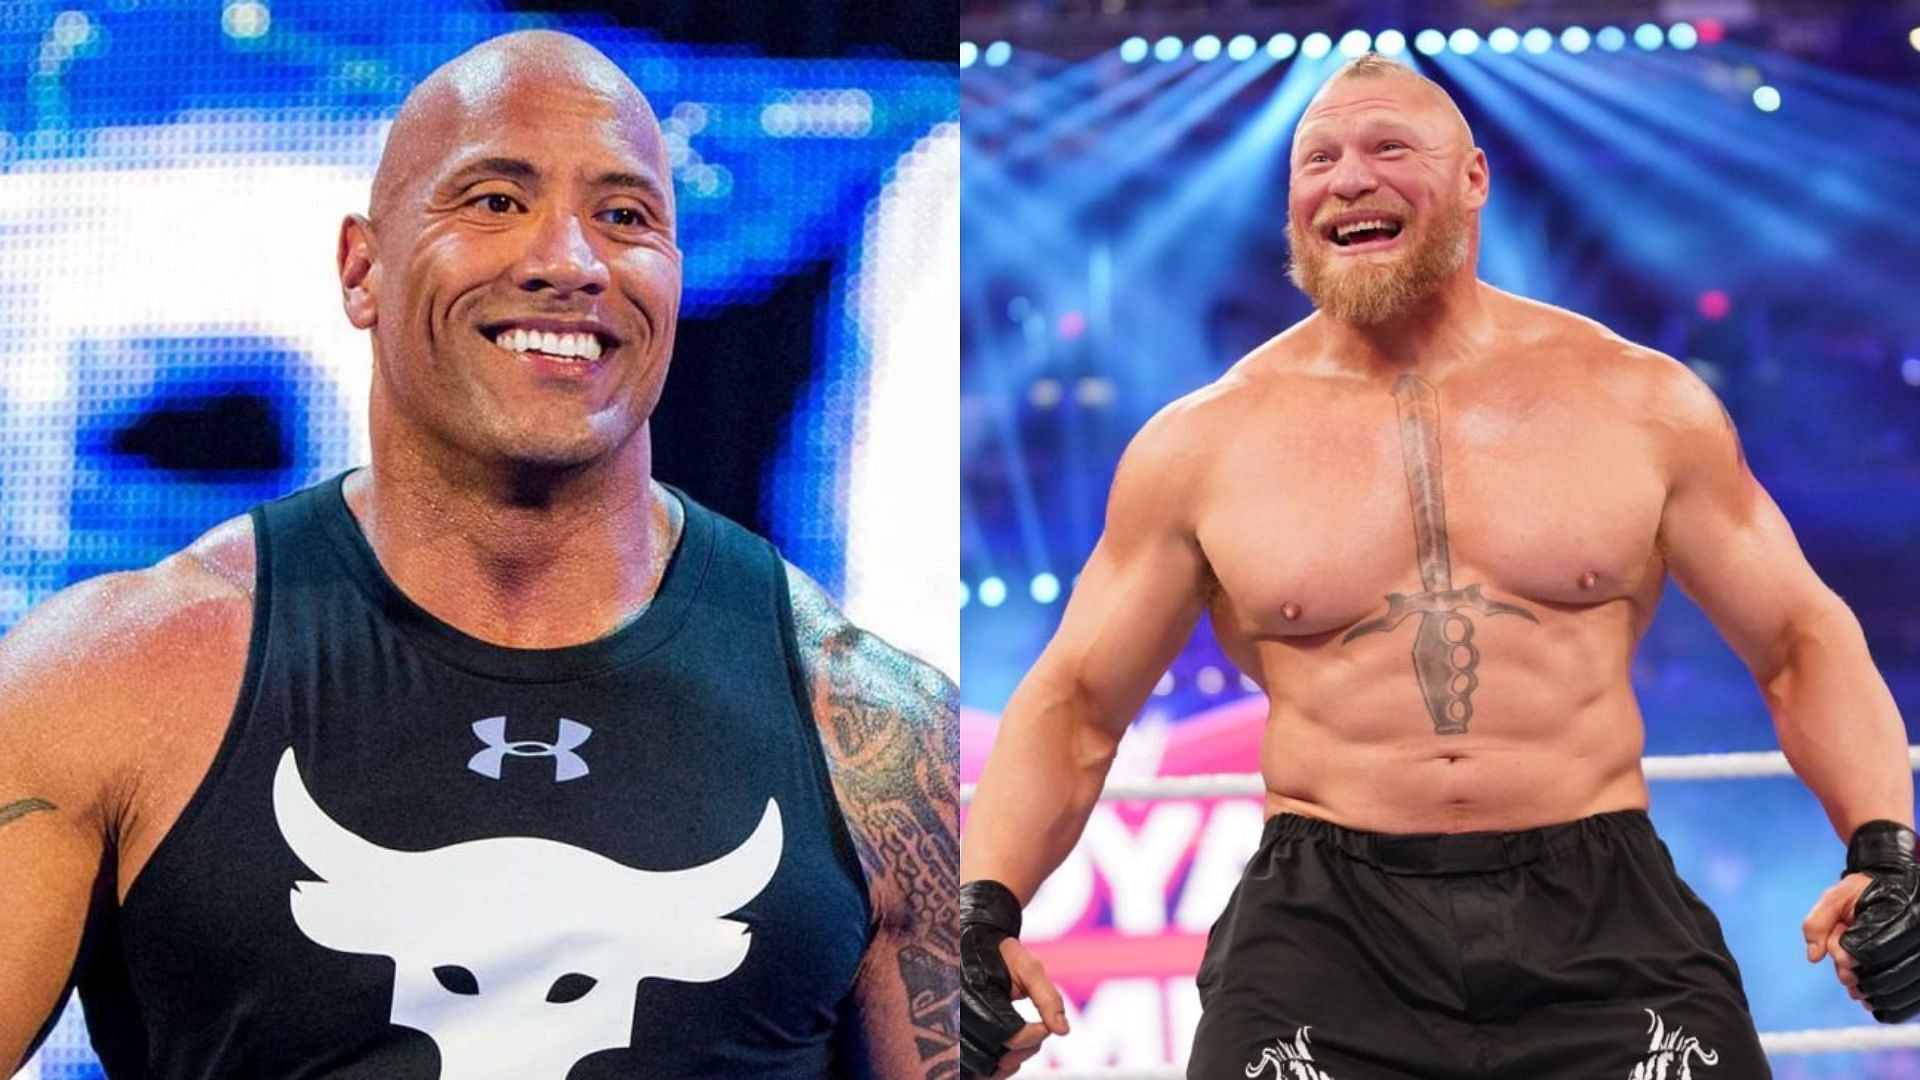 Could either of them return at the Royal Rumble?